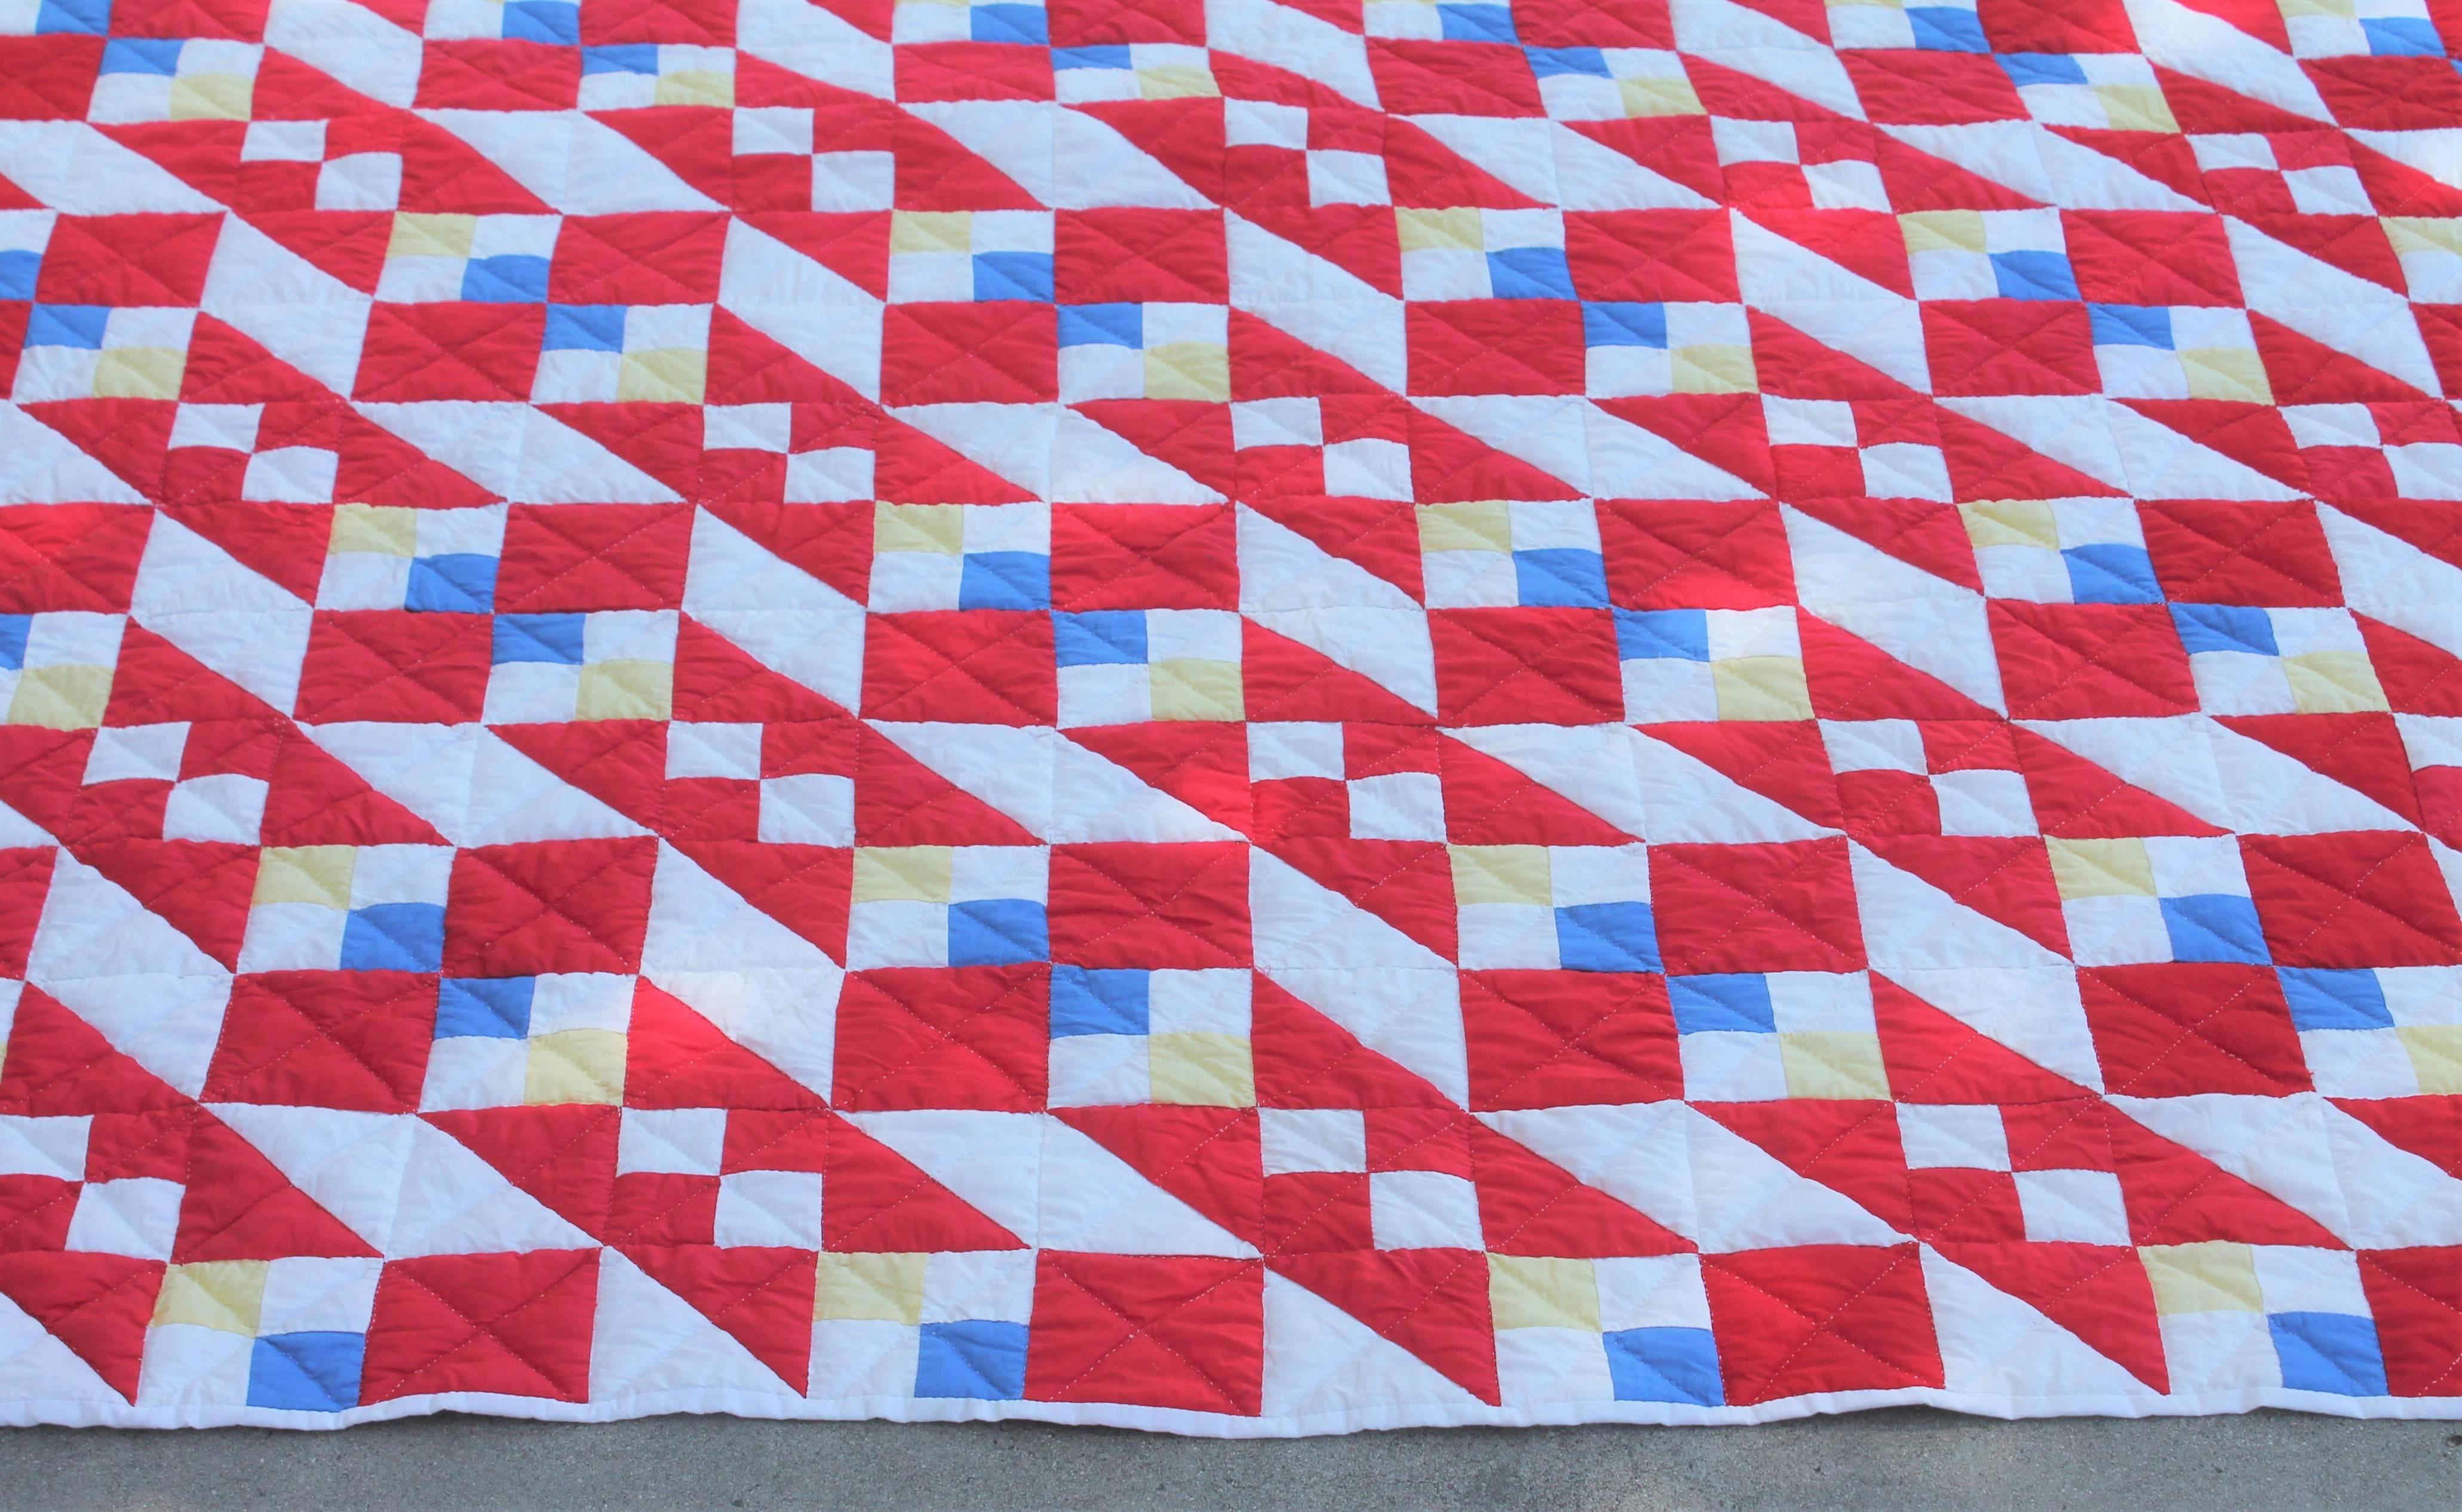 This geometric red, white and blue quilt has small blocks of yellow squares with in the pattern. The condition is very good as well as the quilting is nice and tight.